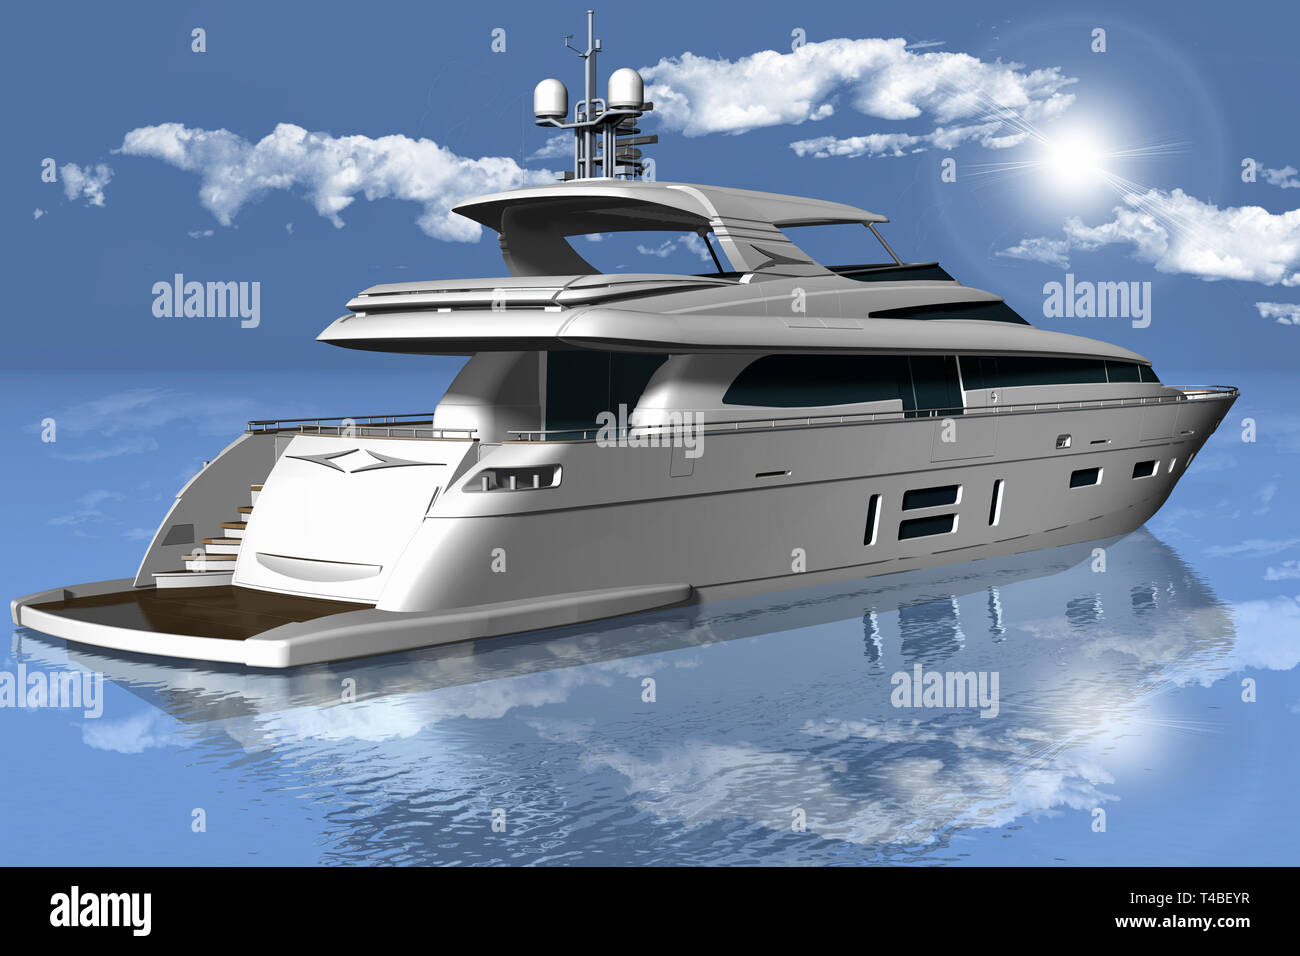 3D illustration. Yacht in the sea with the background of sky, clouds and sun. Stock Photo